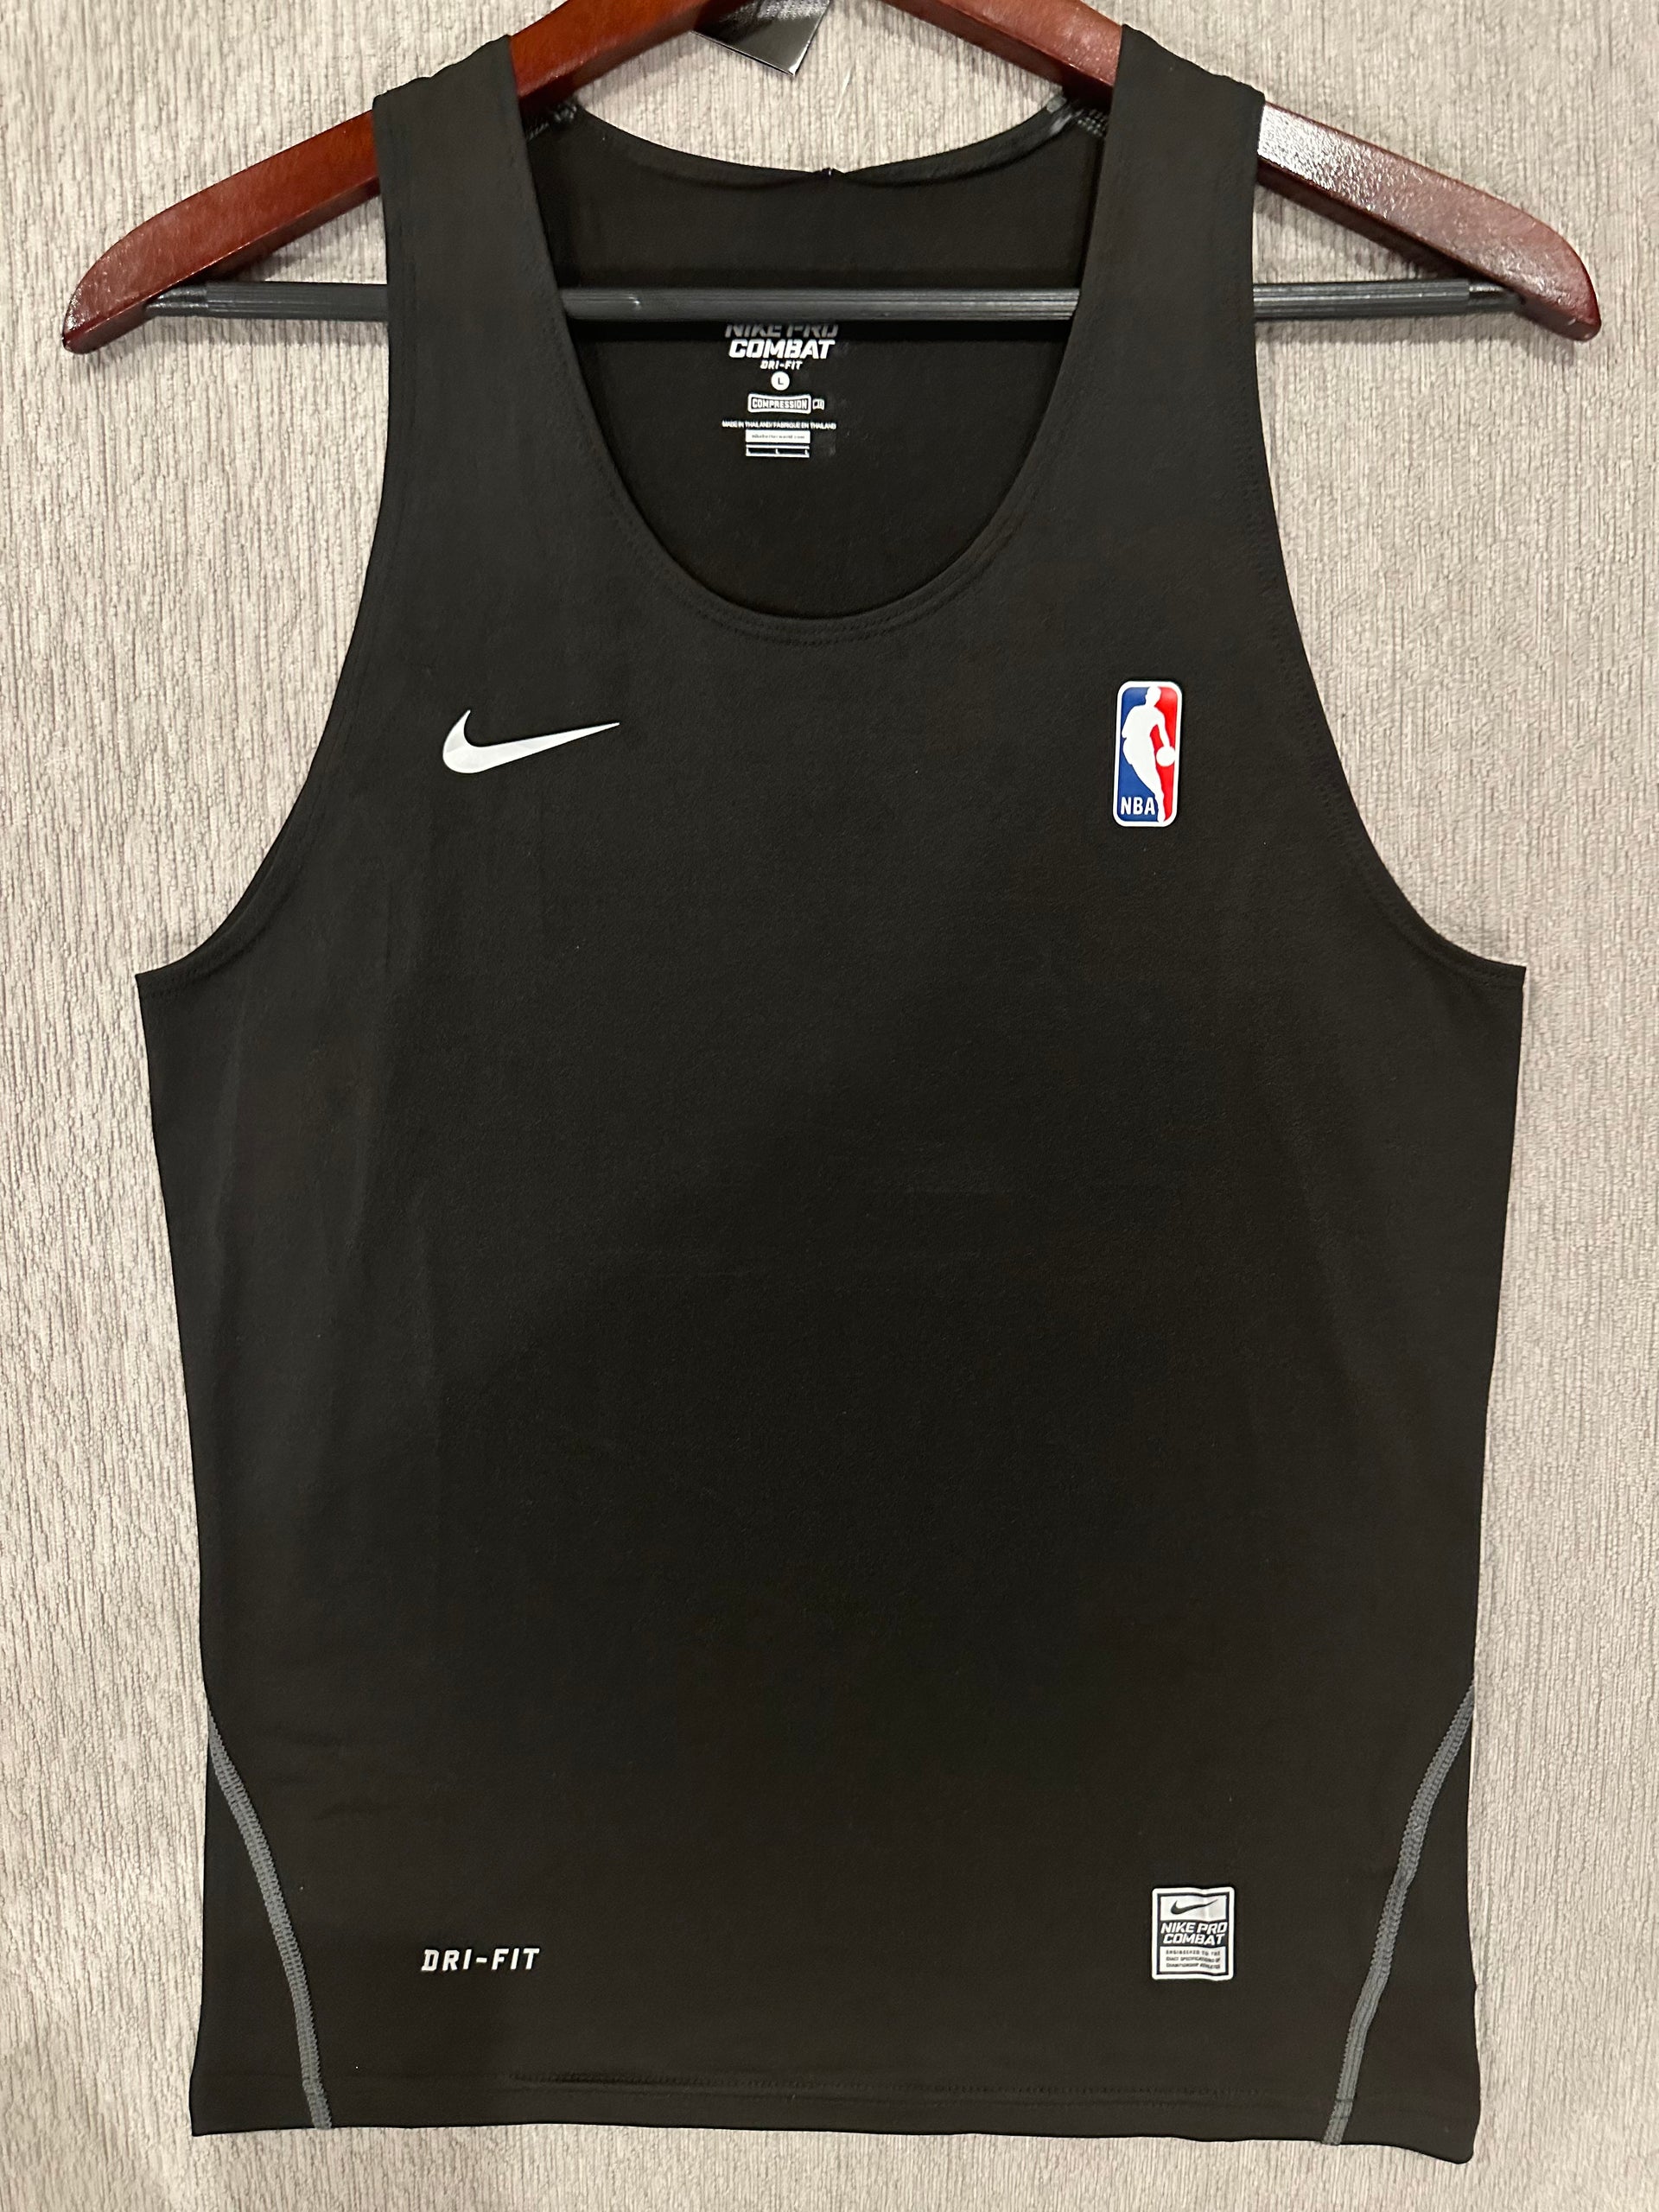 nba compression tank tops with pads｜TikTok Search